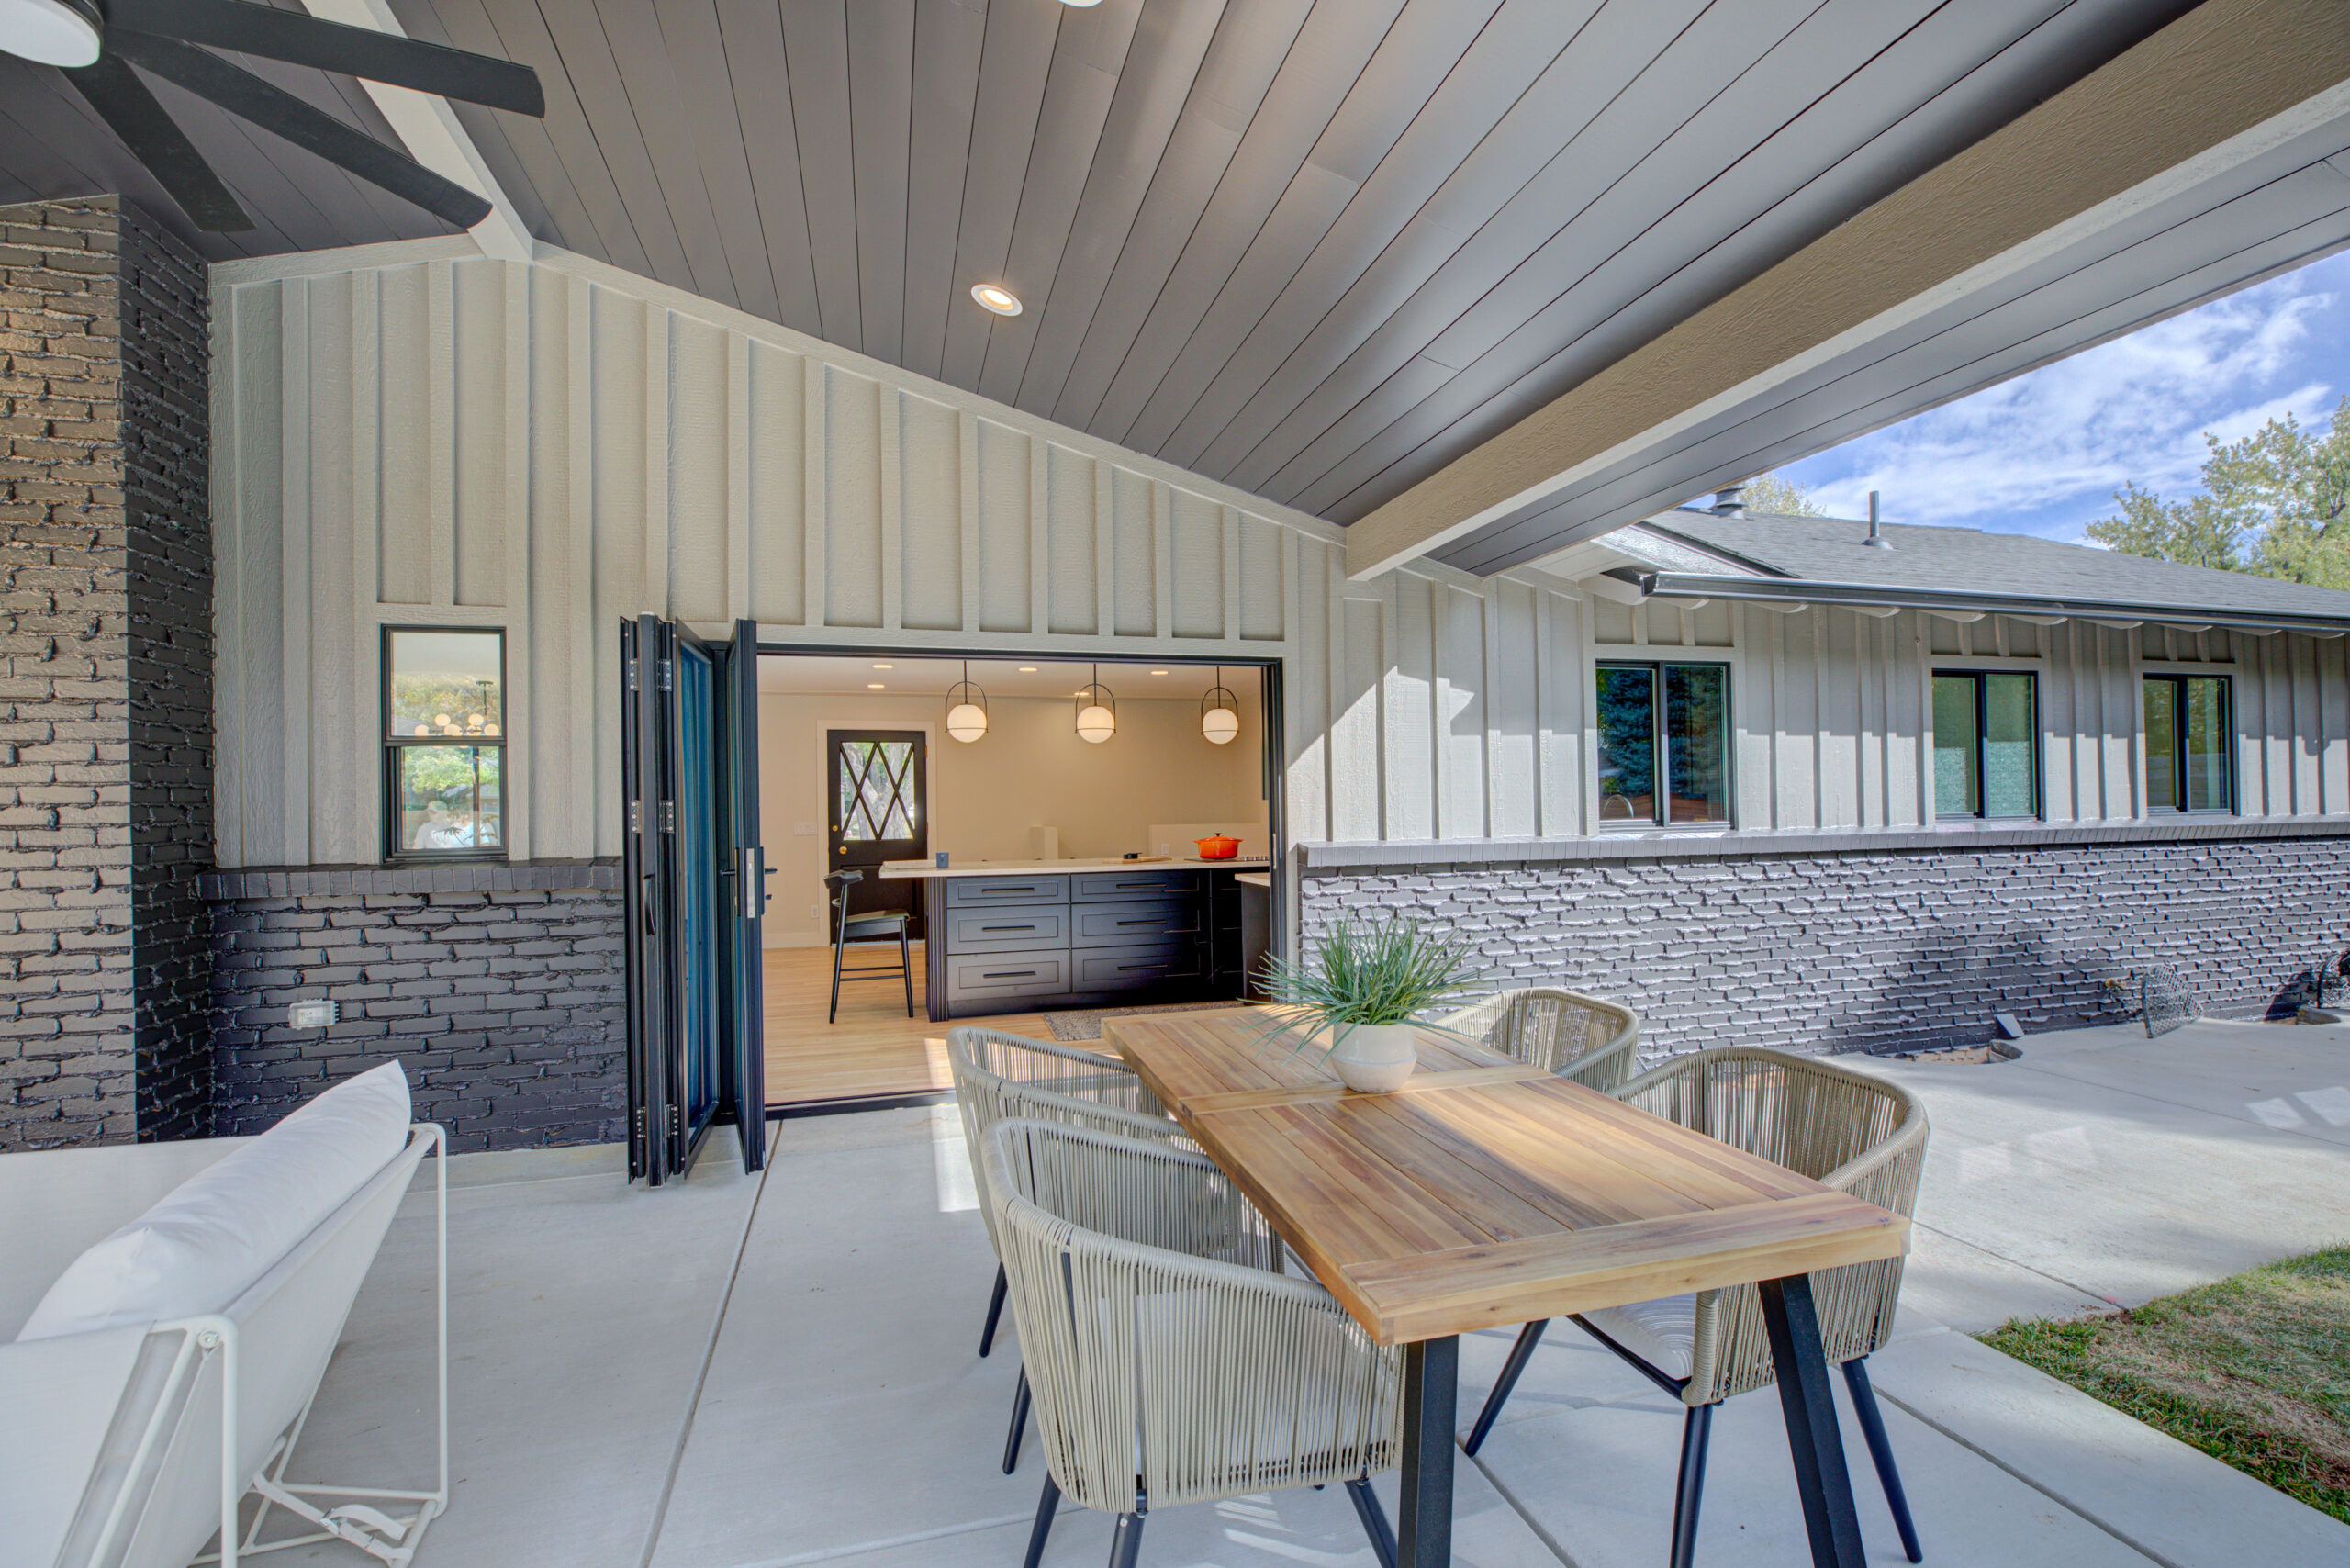 Spacious and modern covered patio area featuring a wooden dining table set and sleek black accents, with open sliding doors leading to a cozy interior, newly remodeled to reflect Denver's vibrant style.